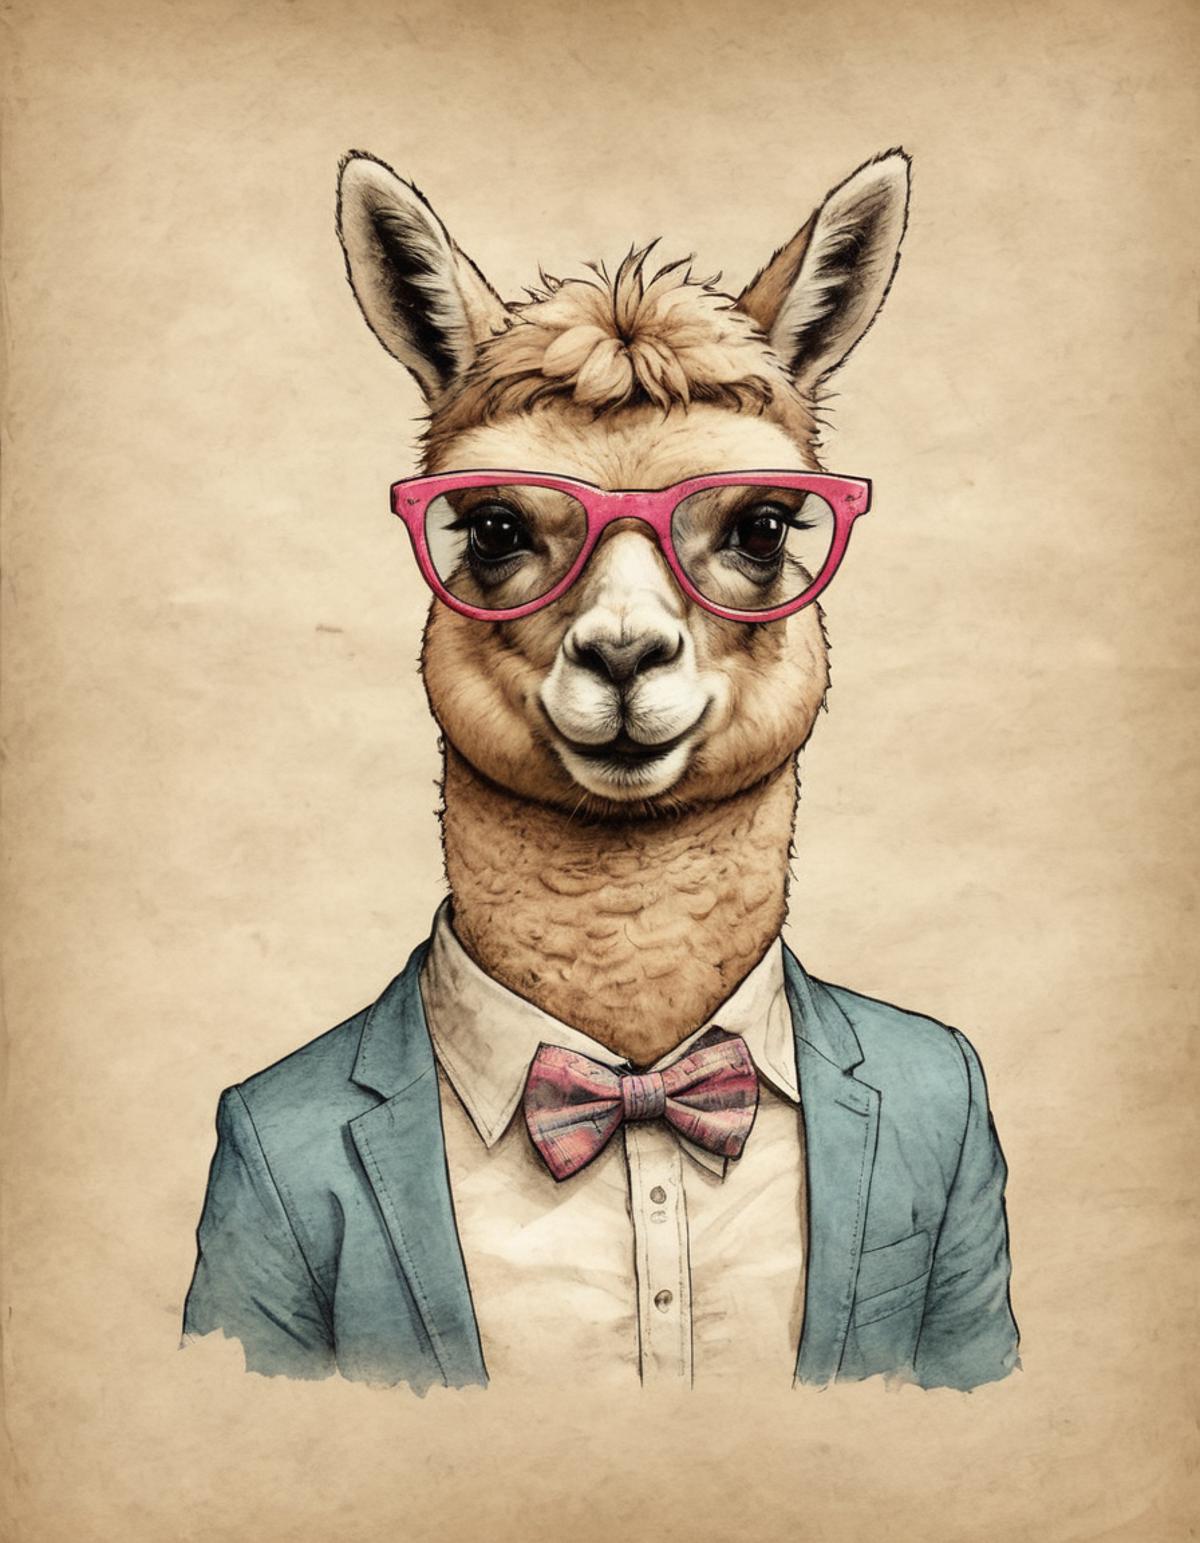 A Llama Wearing Glasses and a Bow Tie in a Suit.